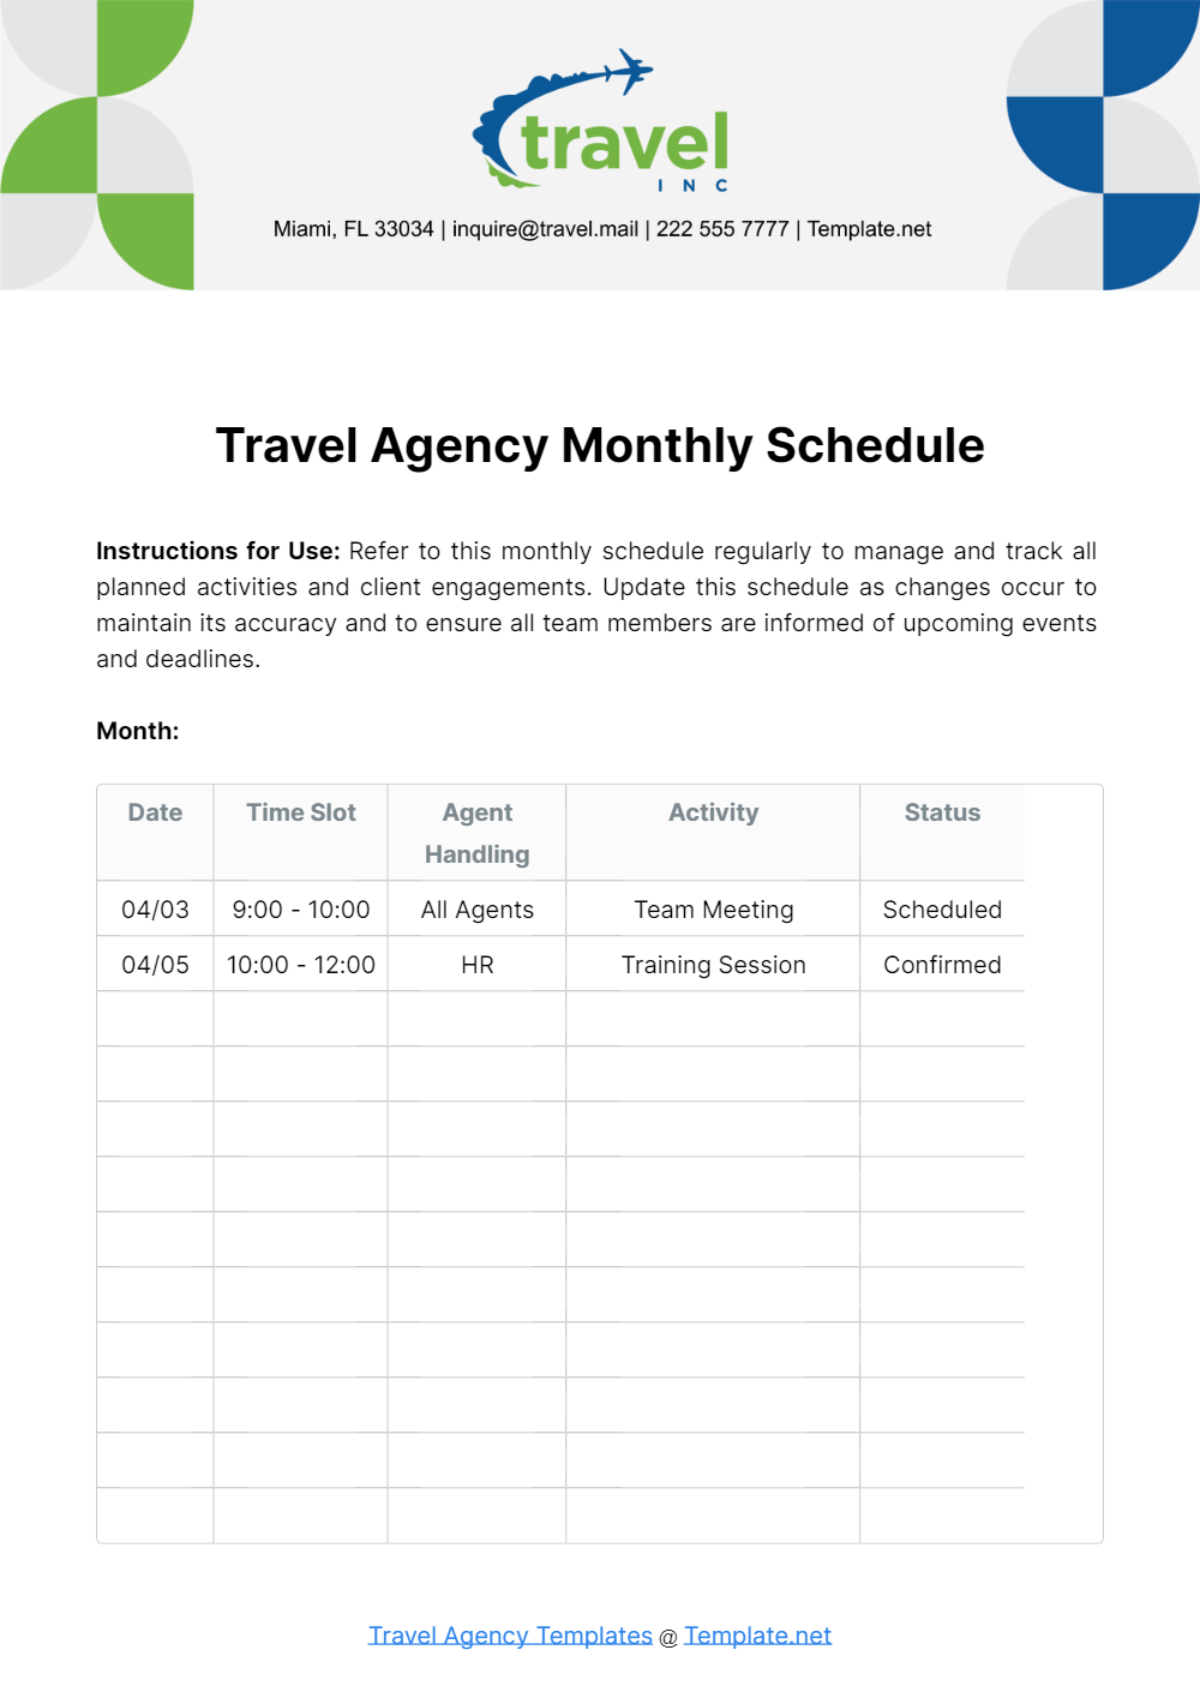 Travel Agency Monthly Schedule Template